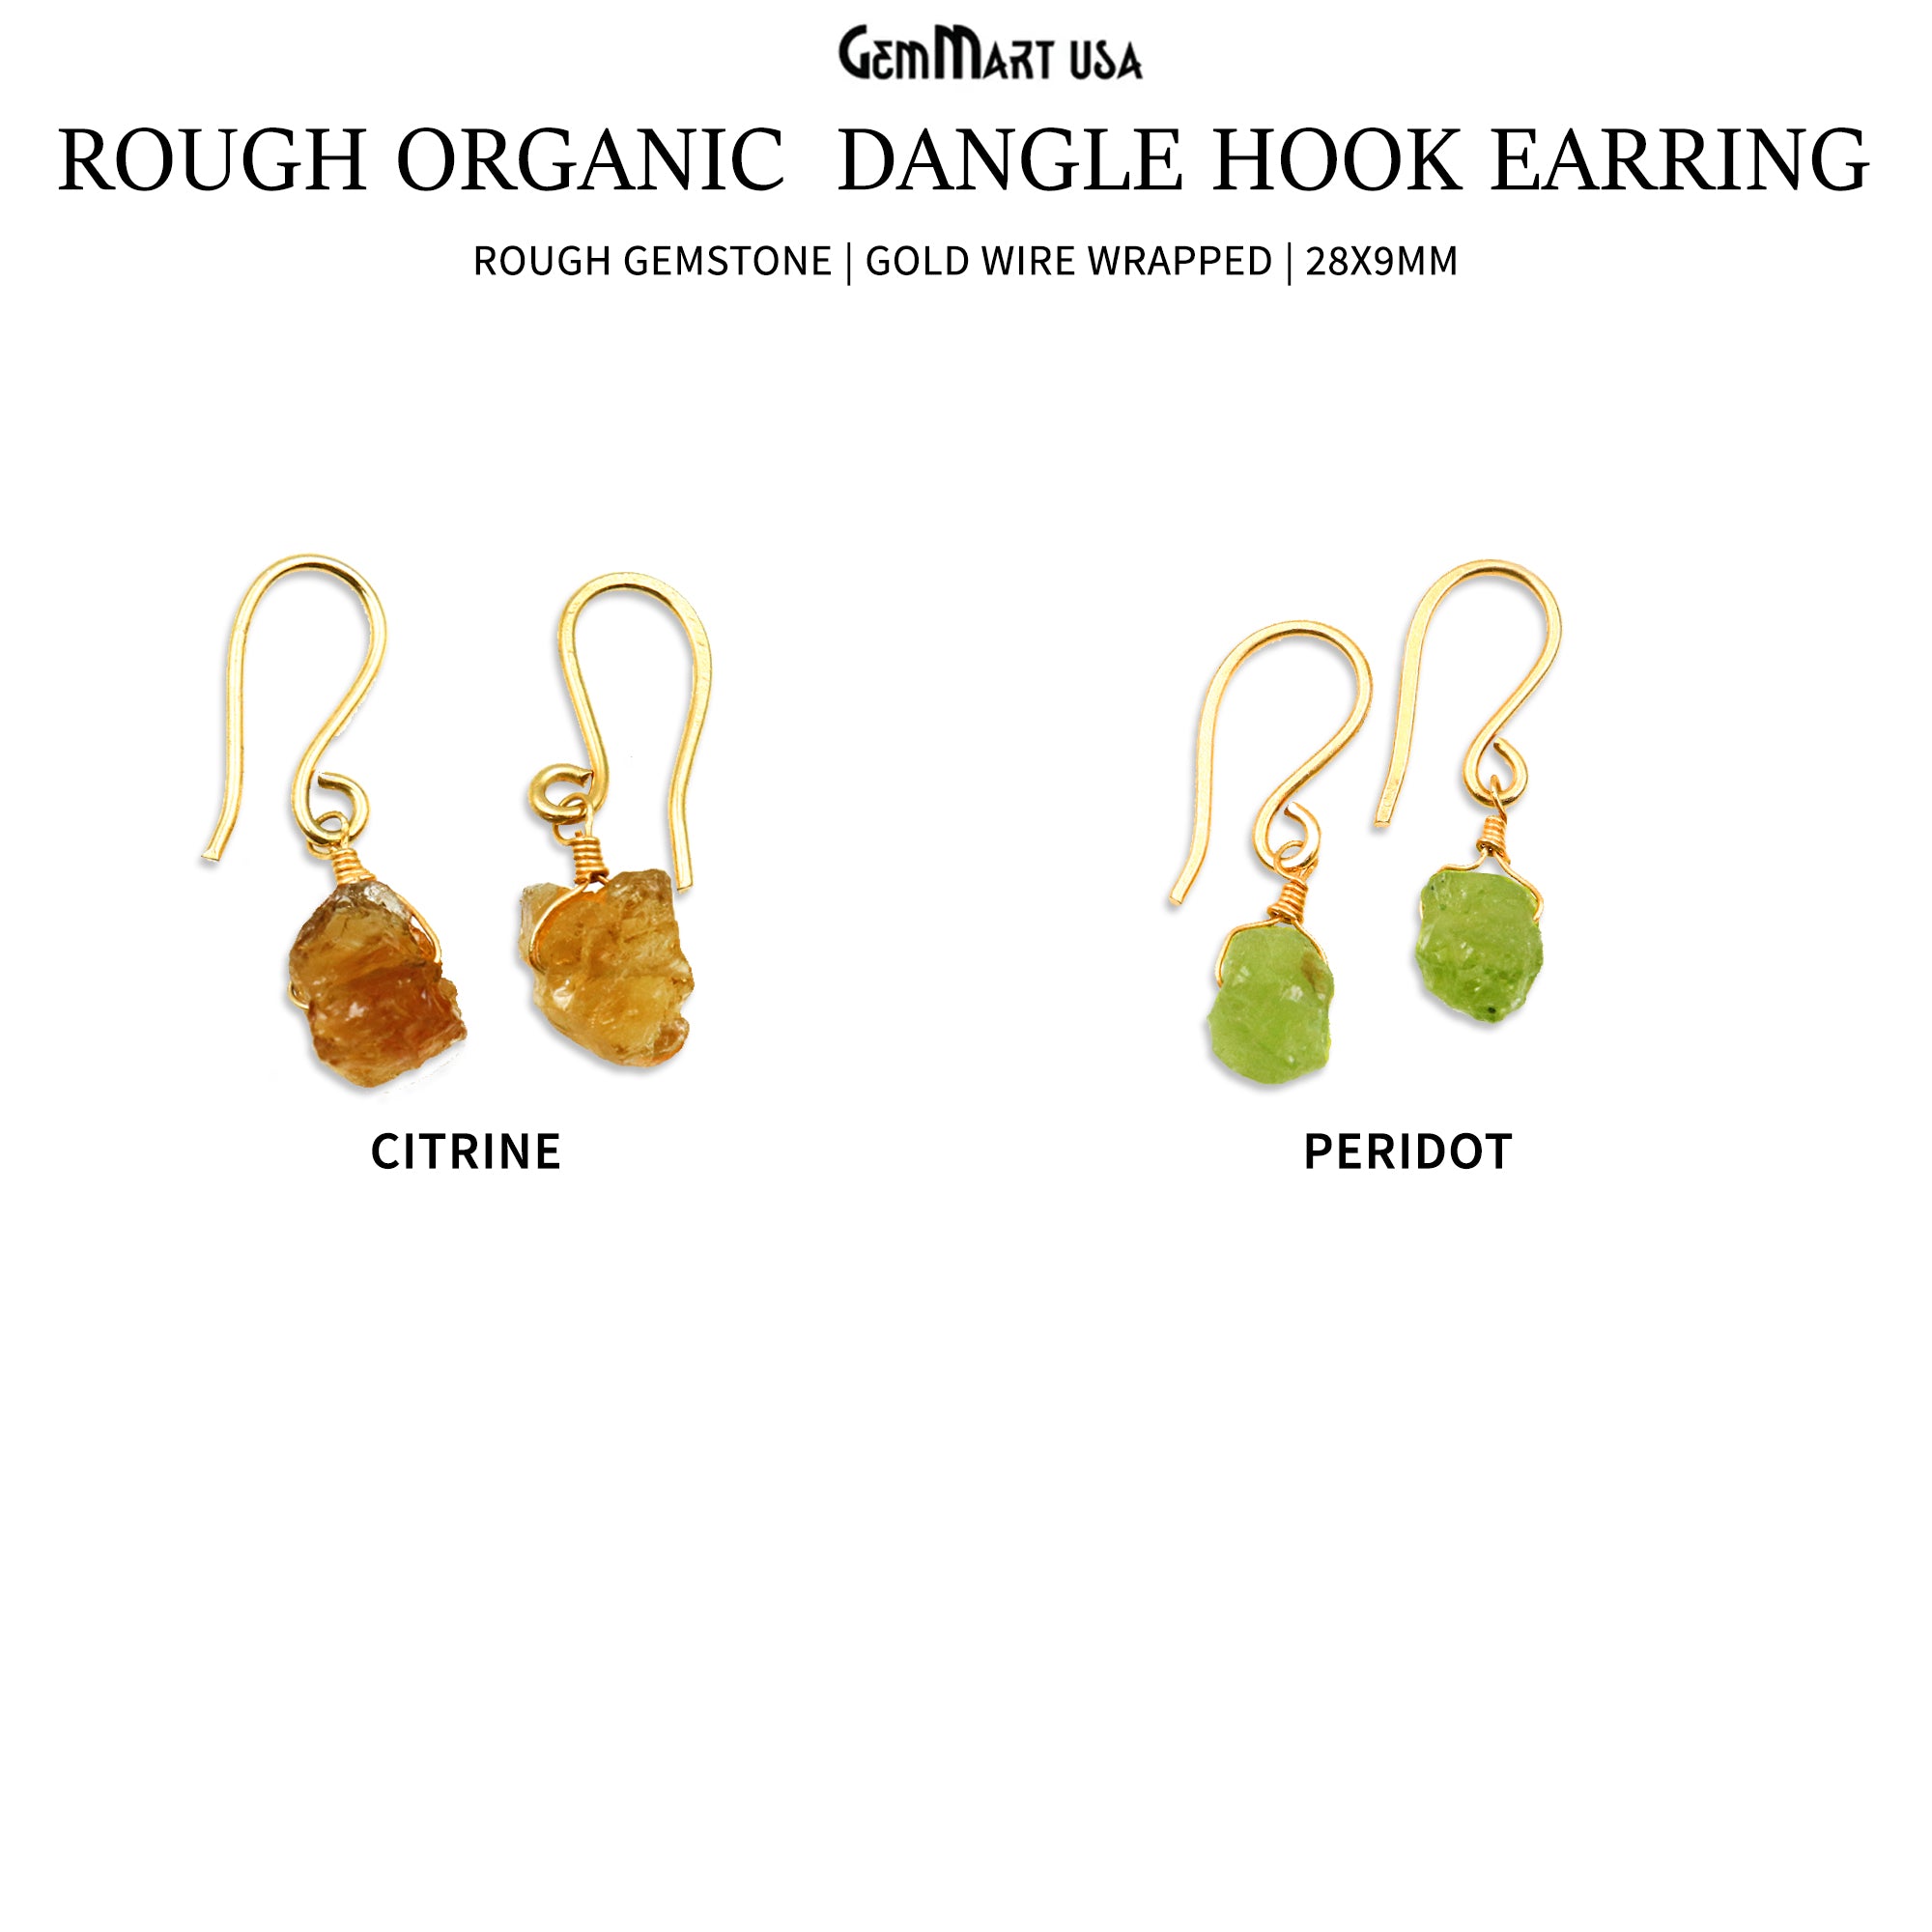 Rough Organic Shape Gold Wire Wrapped 28x9mm Dangle Hook Earring